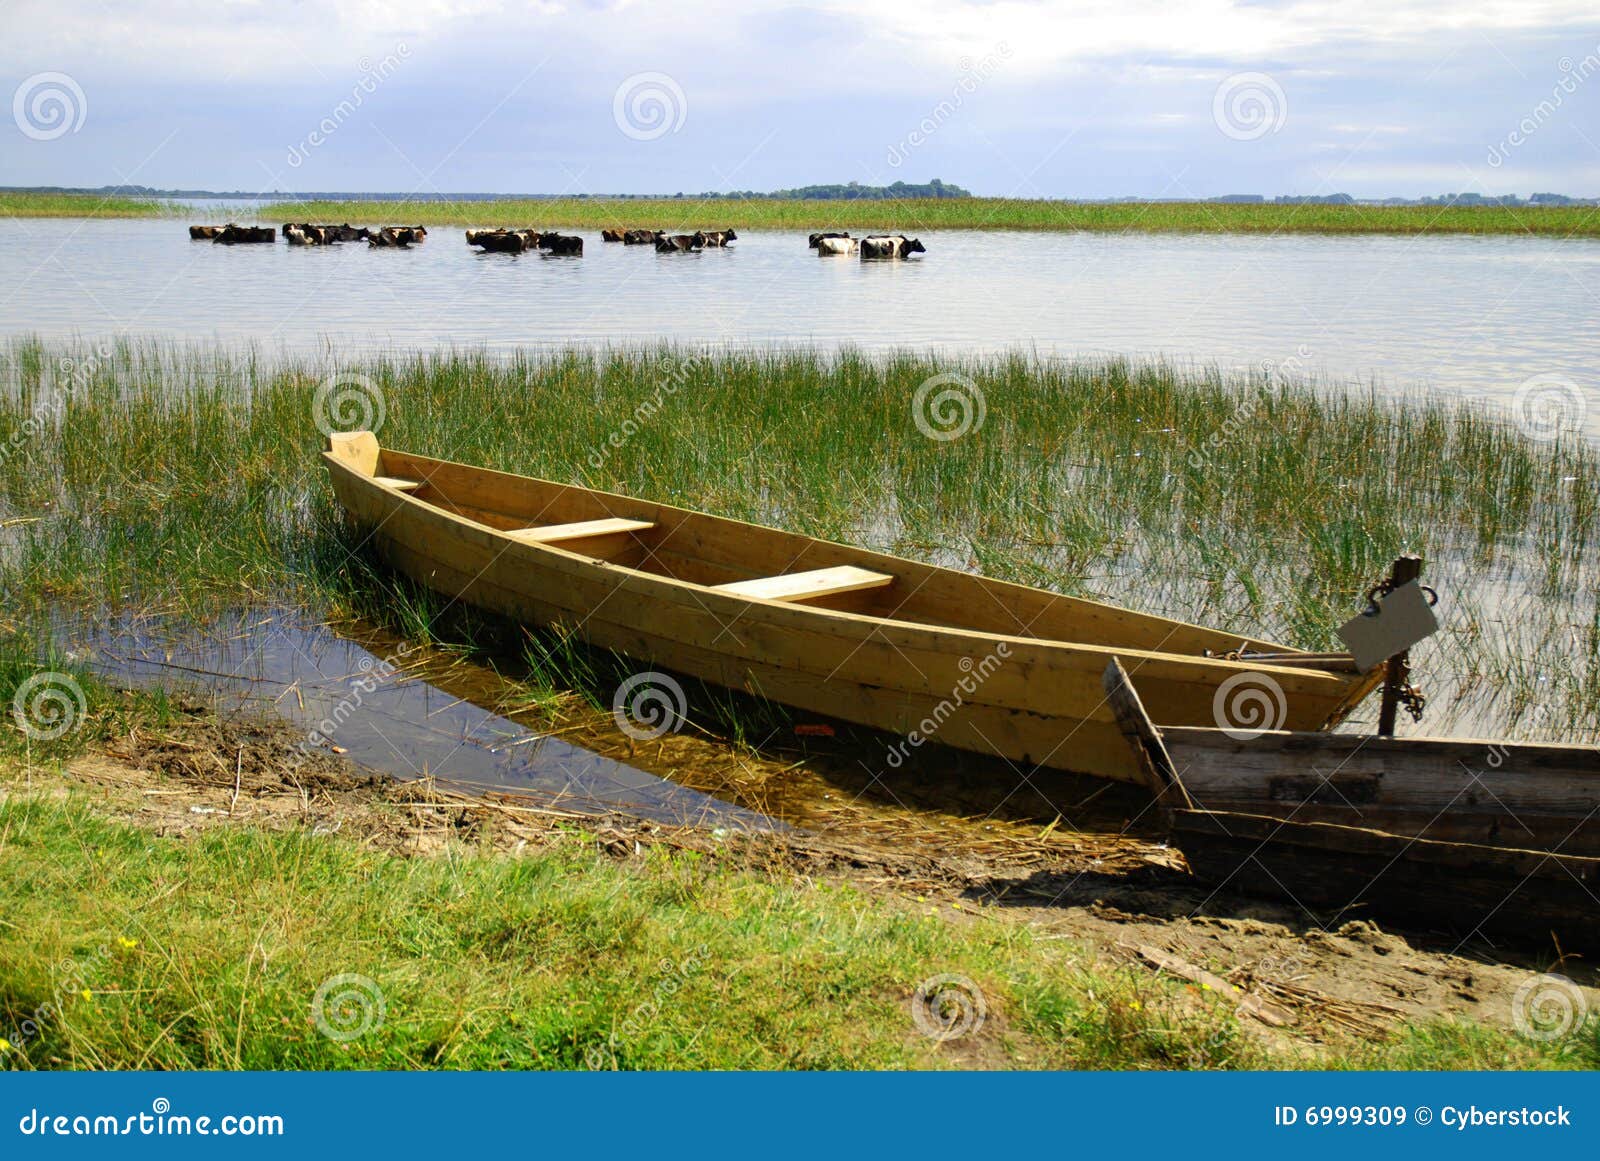 Old Fishing Wooden Boat Royalty Free Stock Images - Image: 6999309